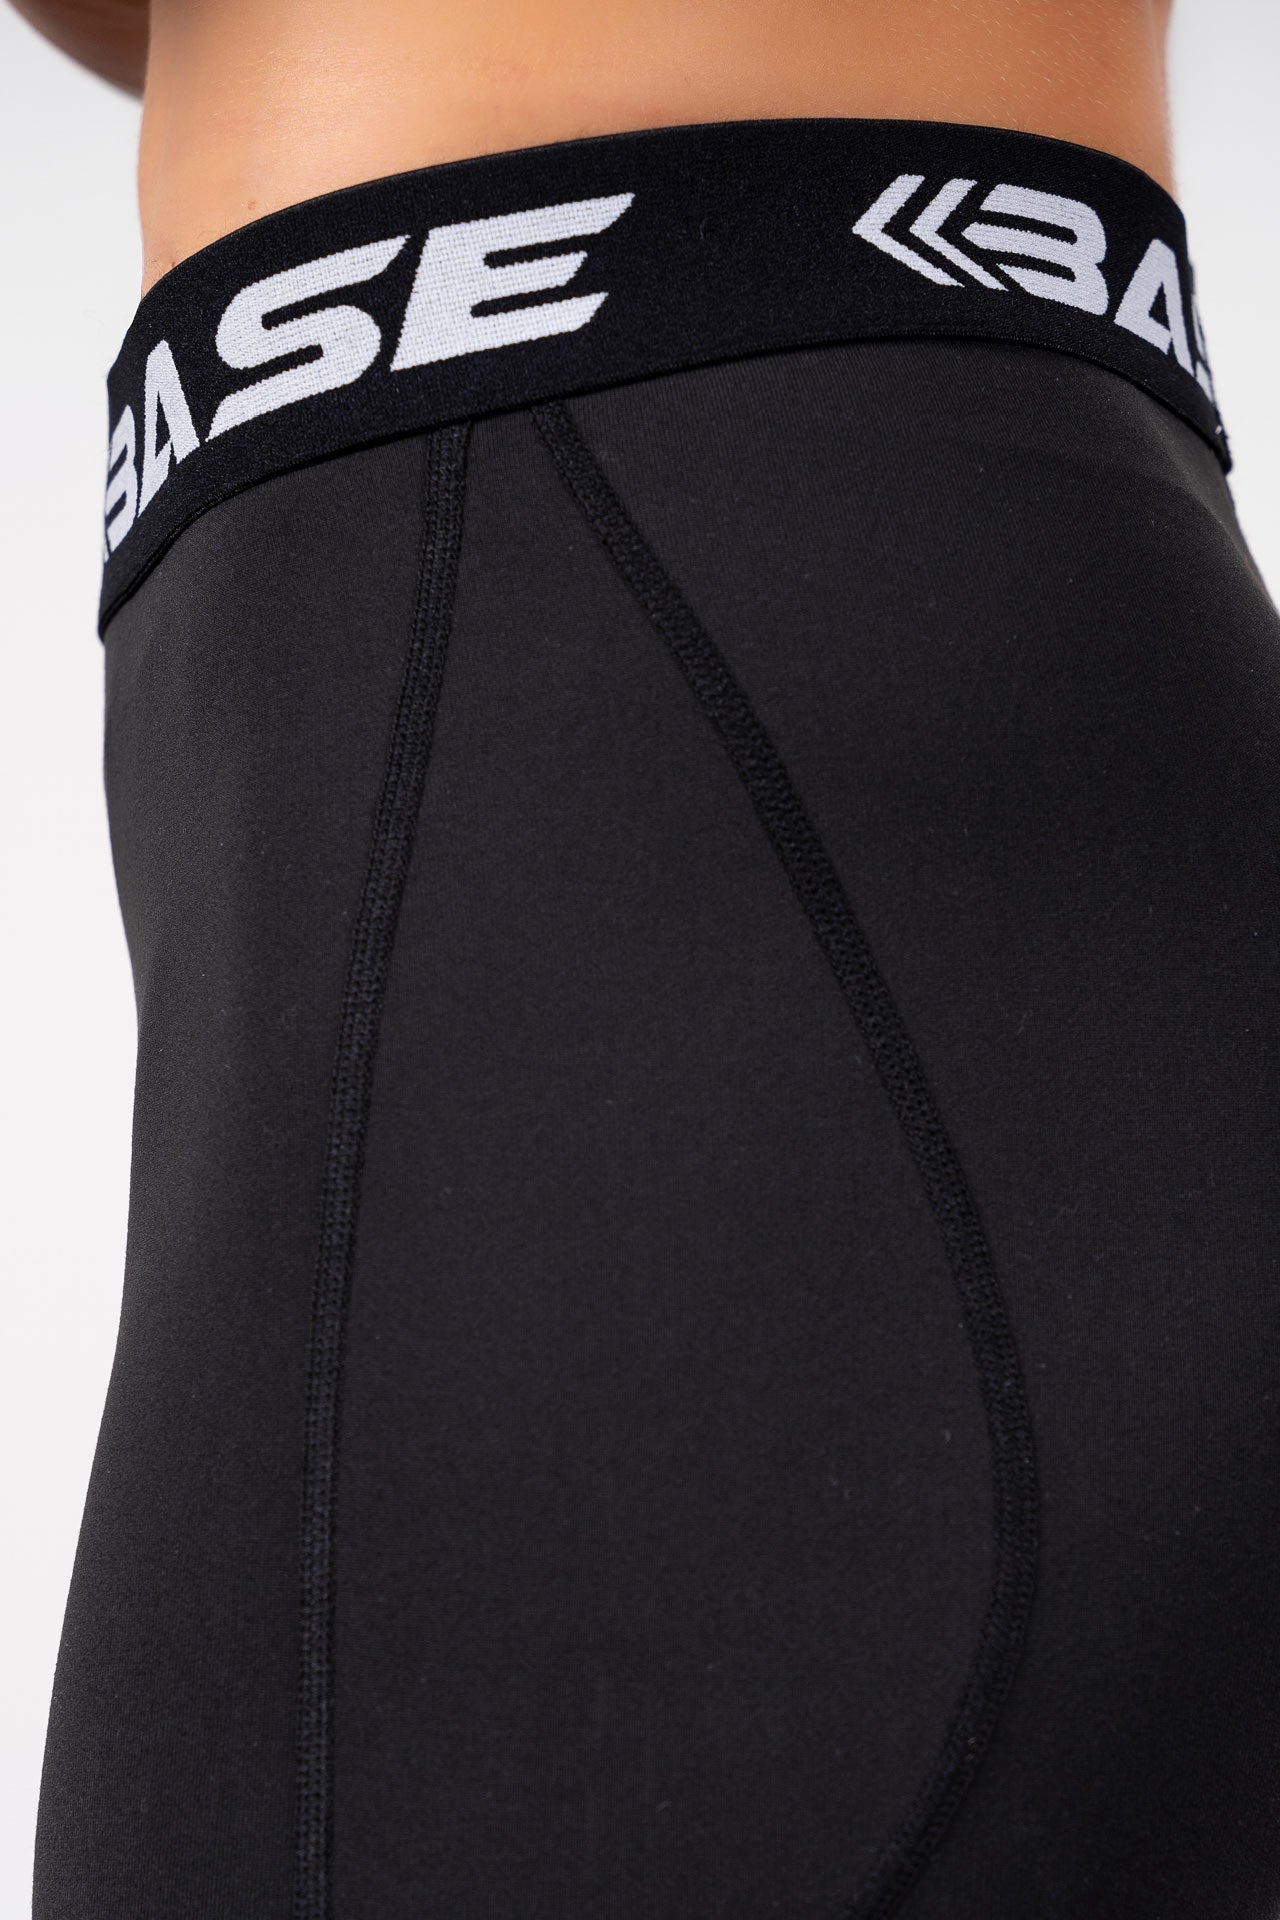 BASE Compression tights BASE Women's Recovery Tights - Black